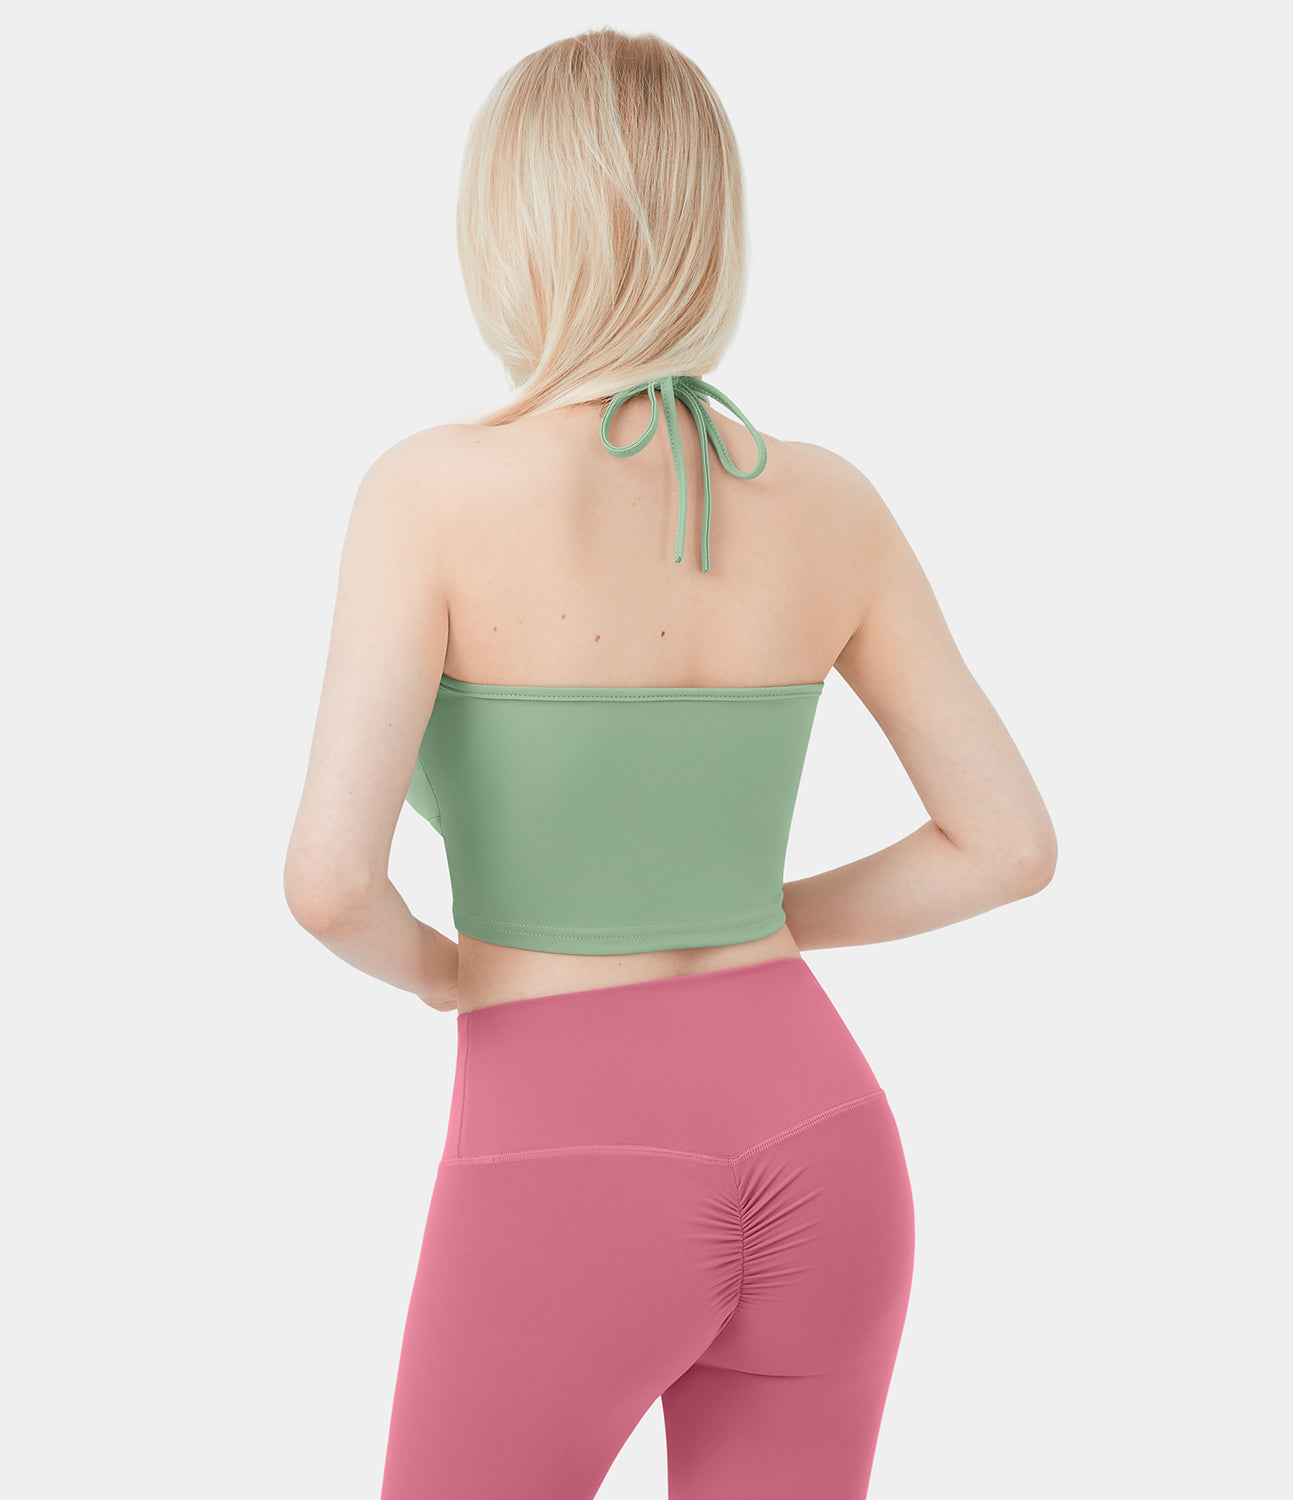 

Halara Halter Backless Crisscross Lace Up Ruched Cut Out Cropped Casual Tank Top Tank Top - Pastel Green -  golf tops halter top tunic tops